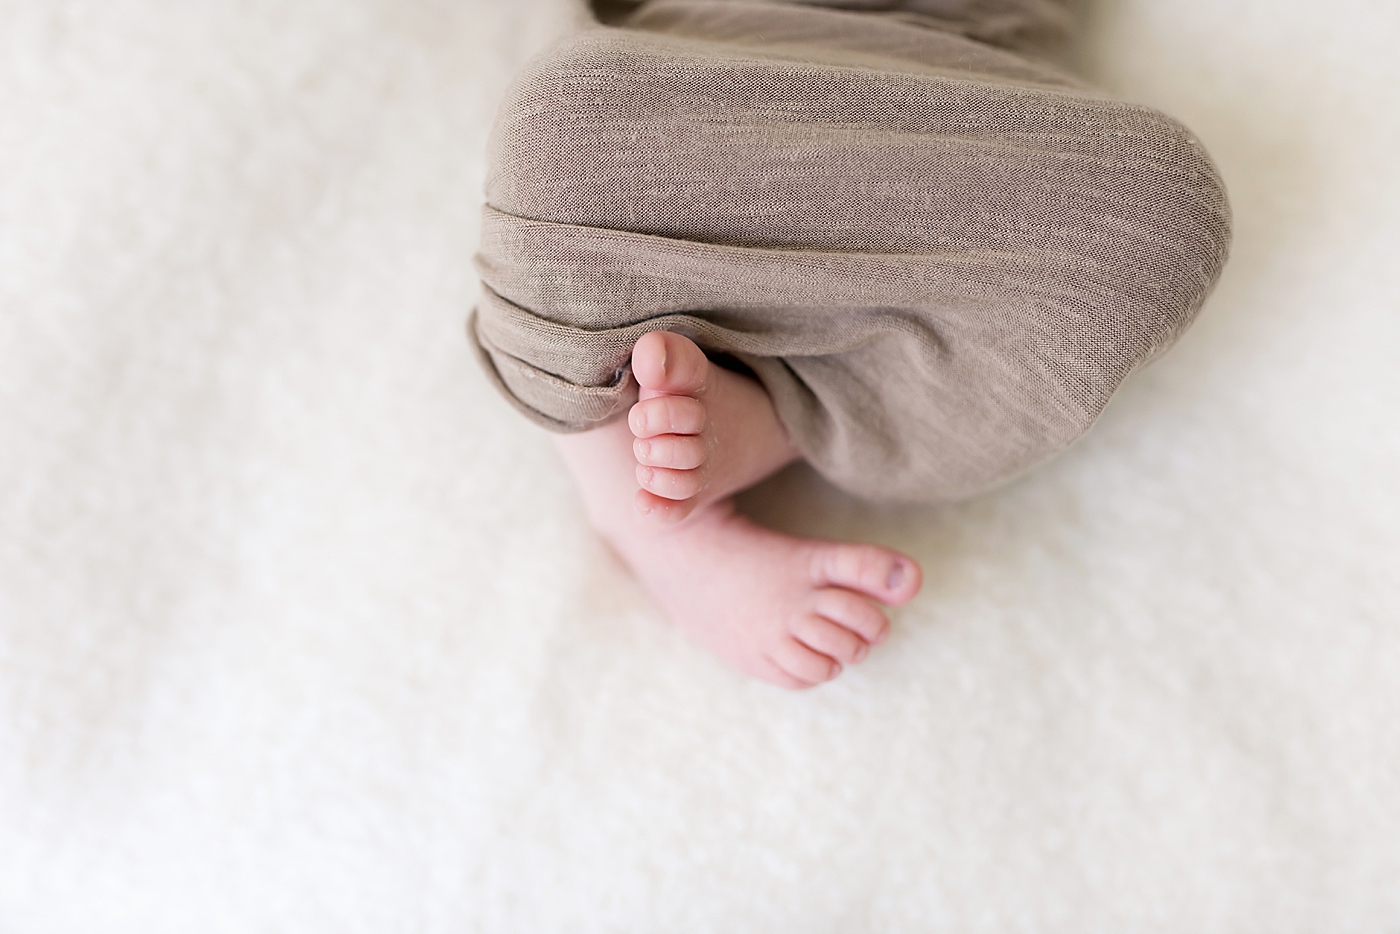 Newborn baby toes wrapped in beige swaddle | Photo by Anna Wisjo